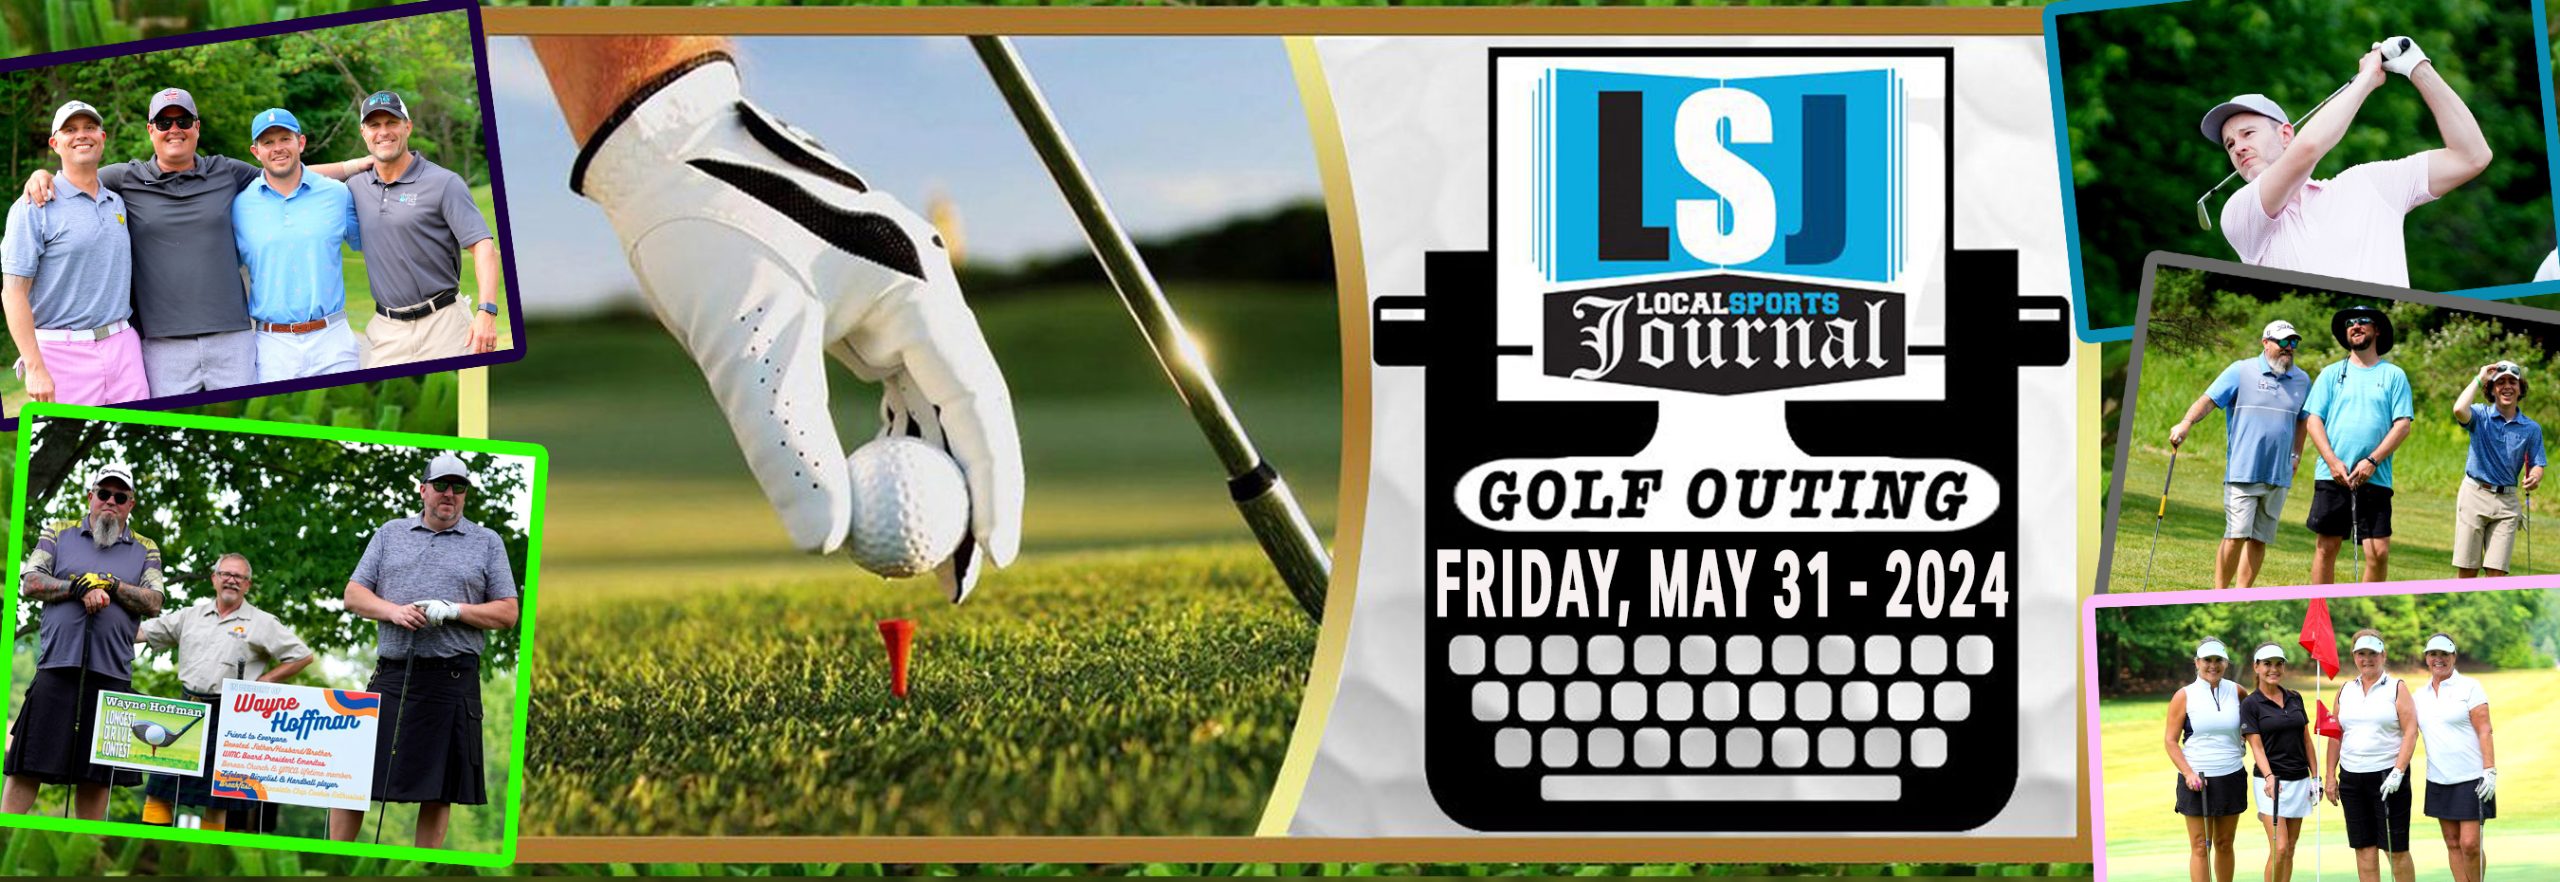 Sign up for the Eighth Annual Local Sports Journal Golf Outing